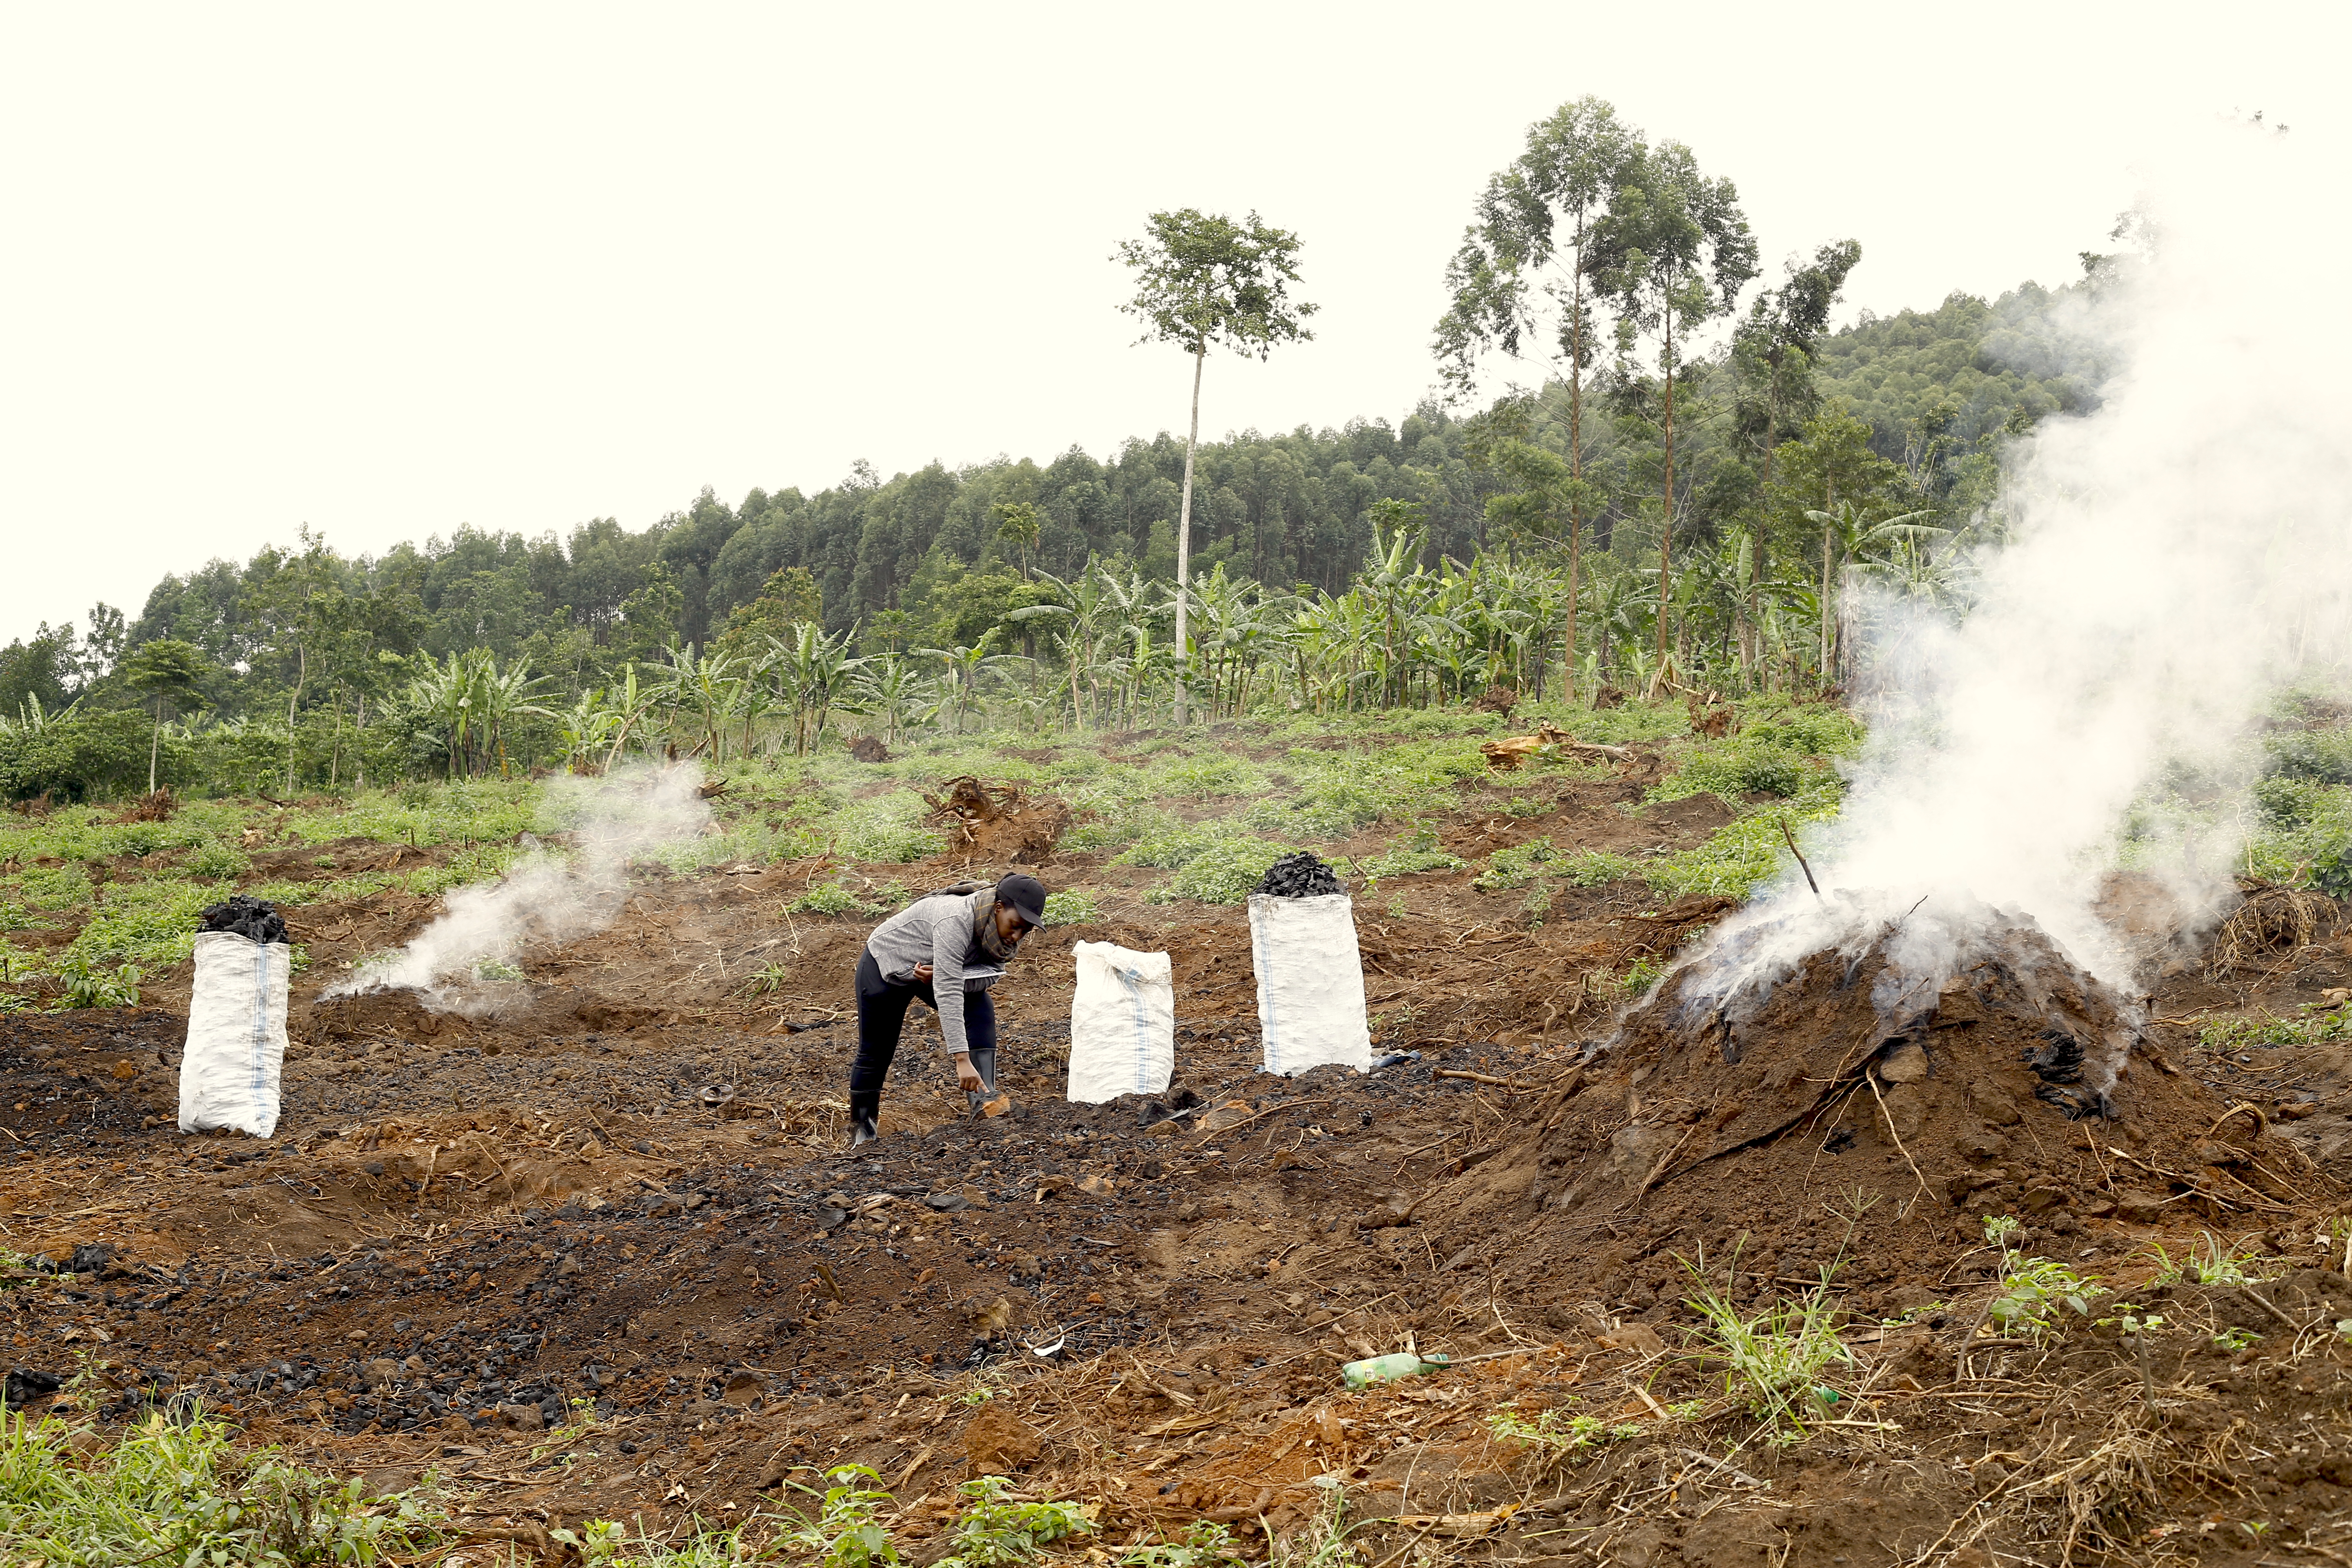 A man tends to a kiln and collects charcoal in front of a eucalyptus plantation.